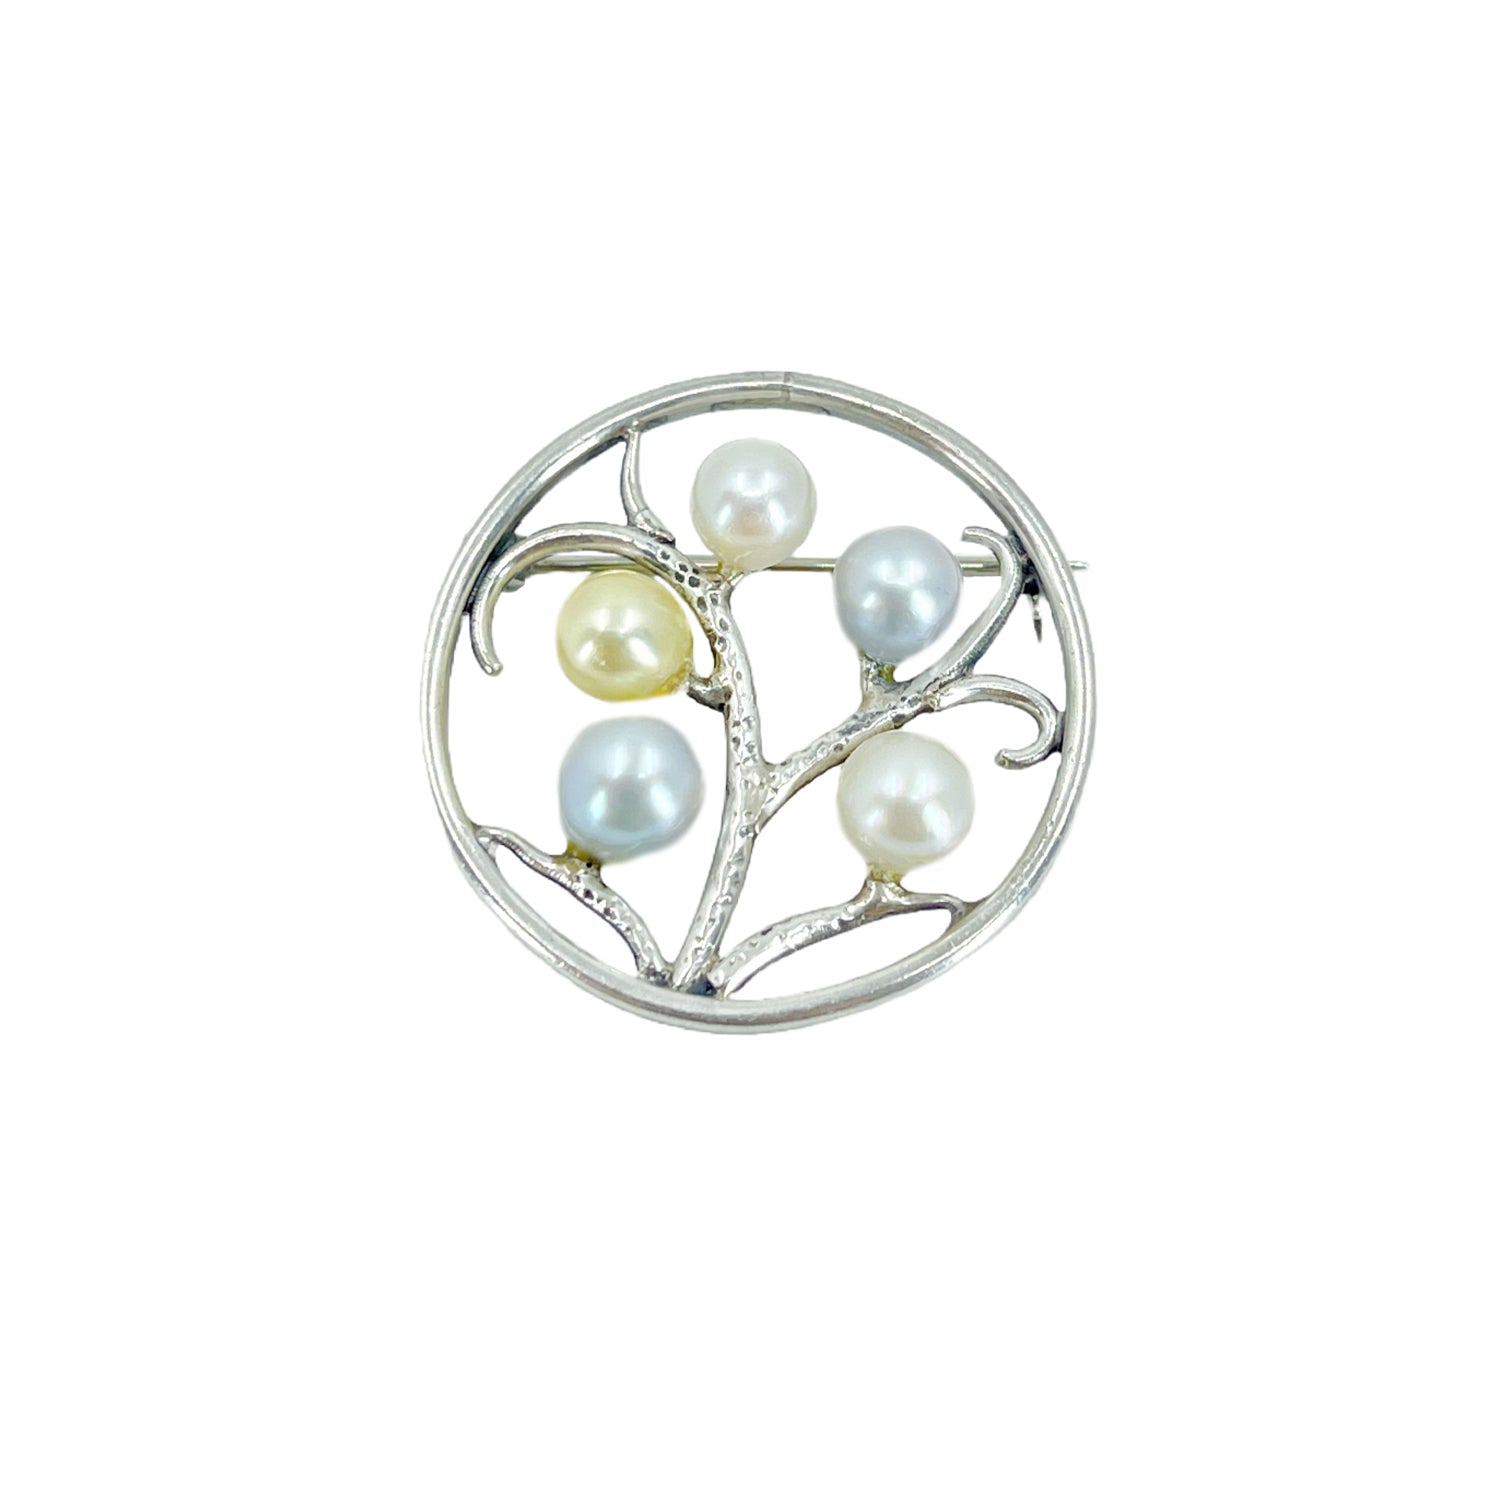  JYX Pearl Brooches for Women Gorgeous Pearl Brooch